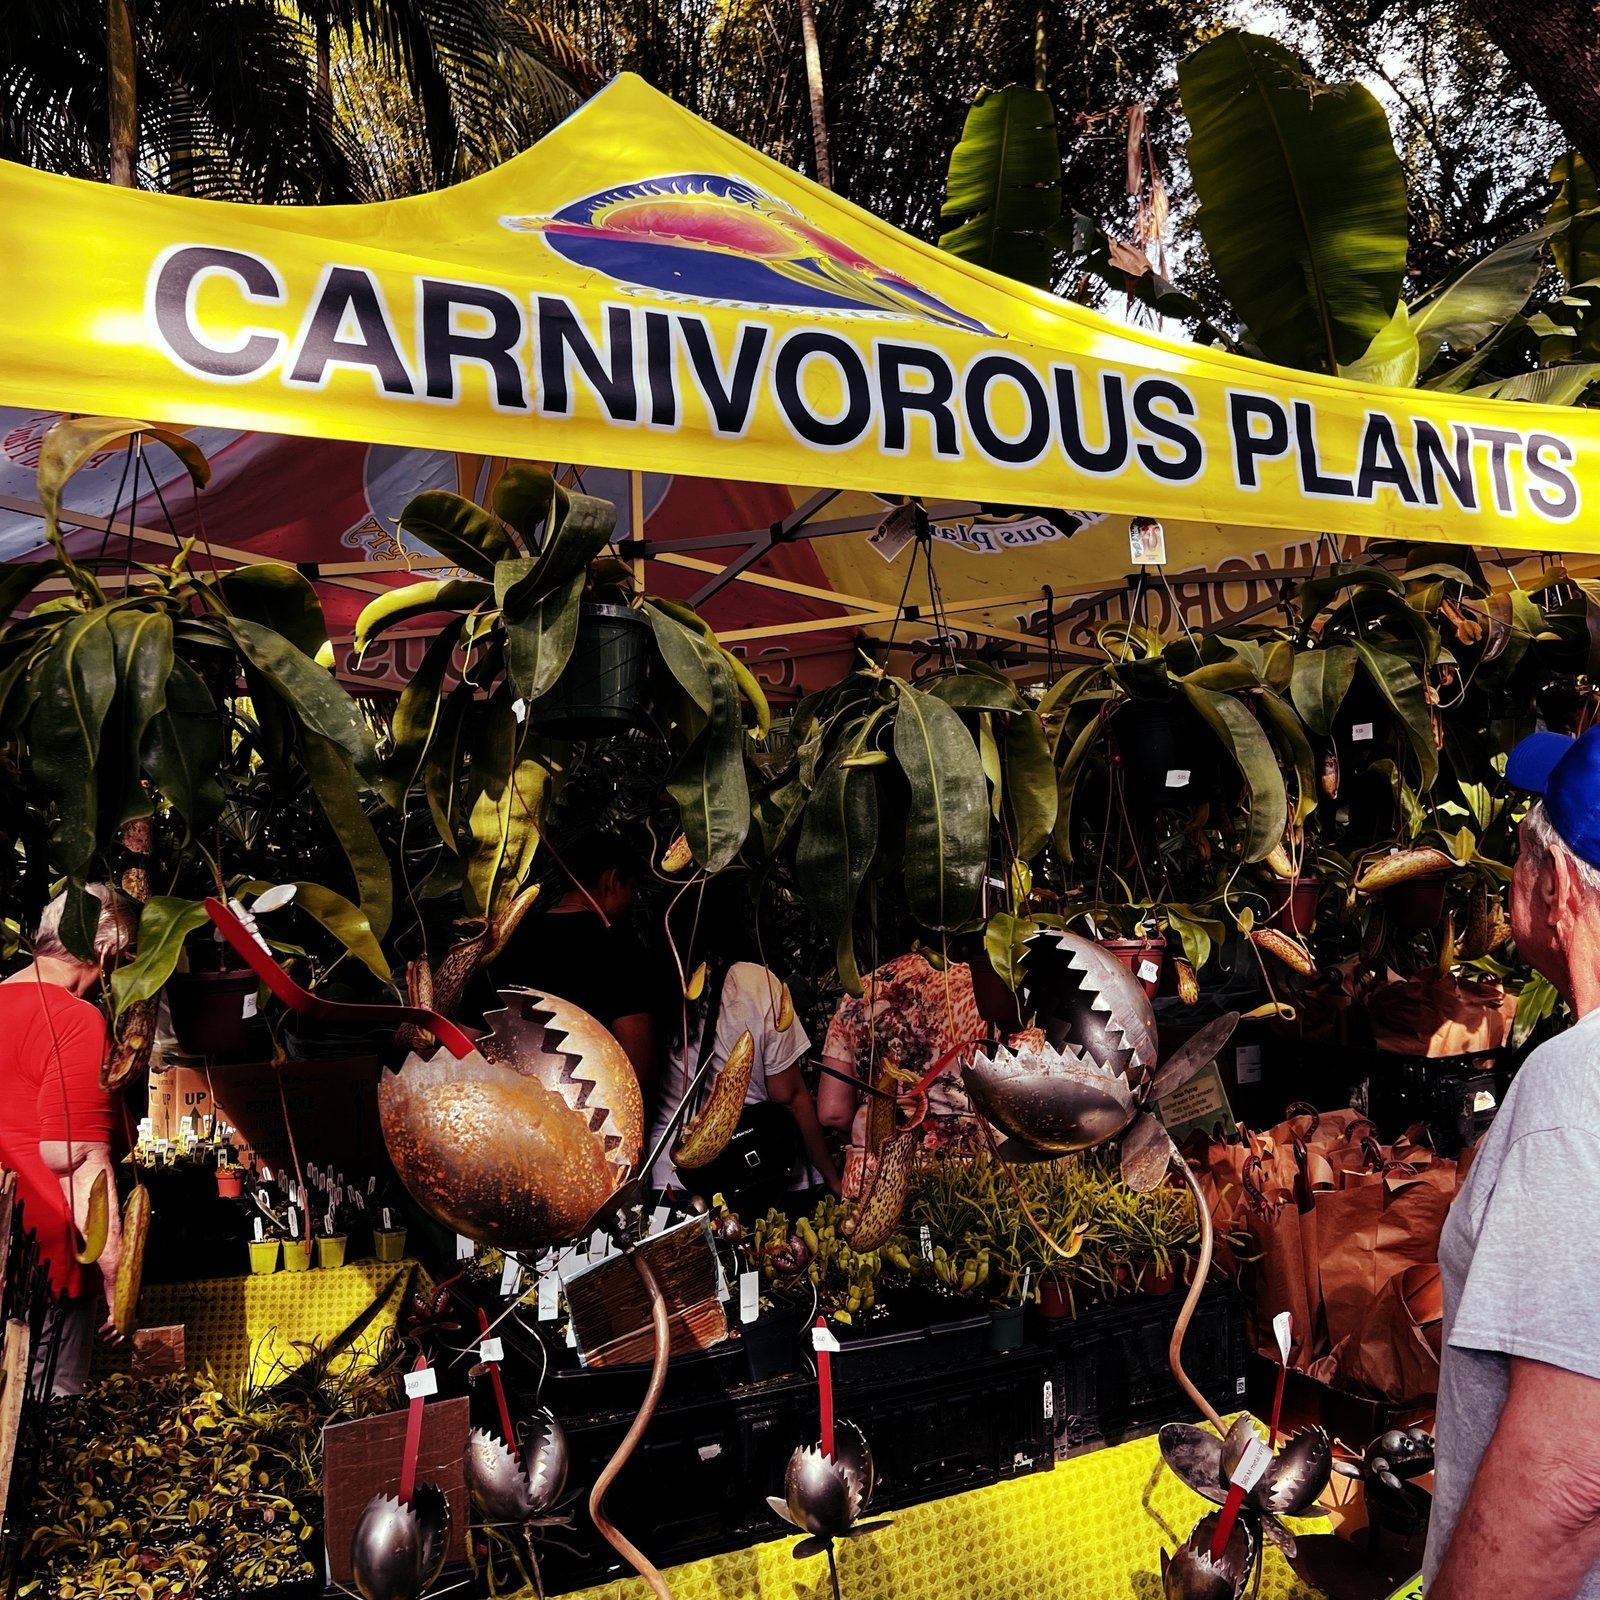 A vendor tent at a plant show with the text CARNIVOROUS PLANTS on top and said plants below it